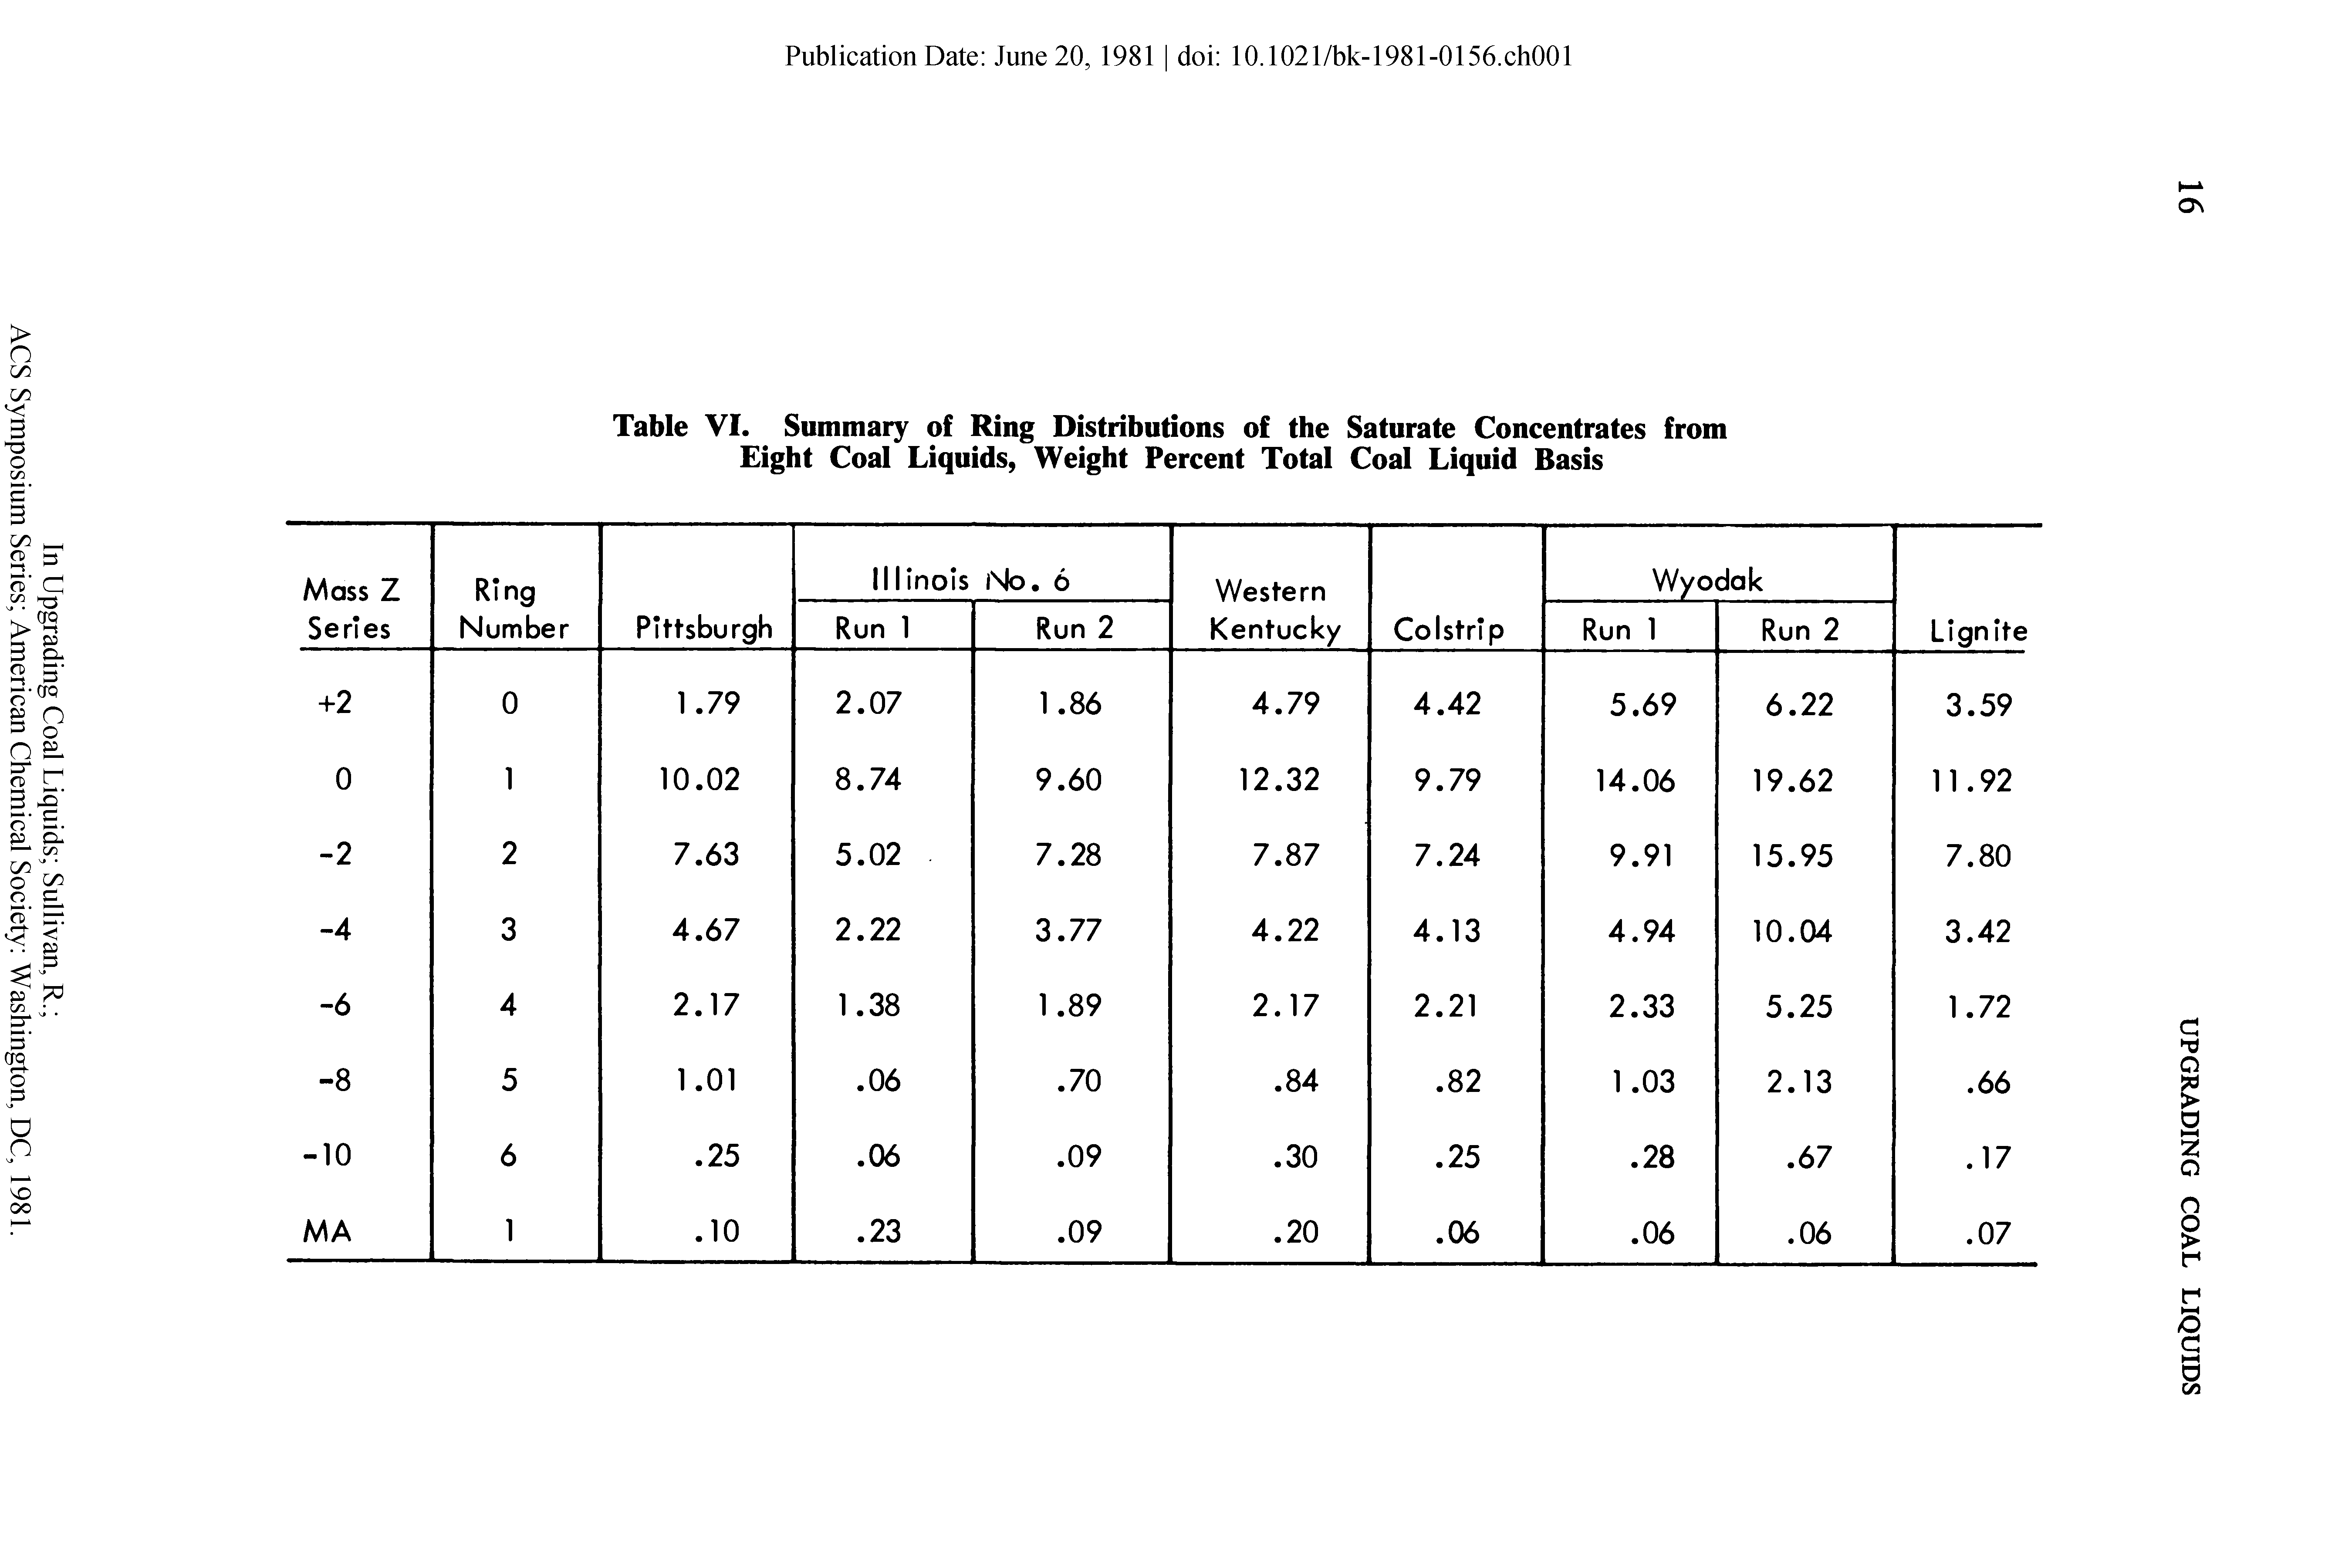 Table VI. Summary of Ring Distributions of the Saturate Concentrates from Eight Coal Liquids, Weight Percent Total Coal Liquid Basis...